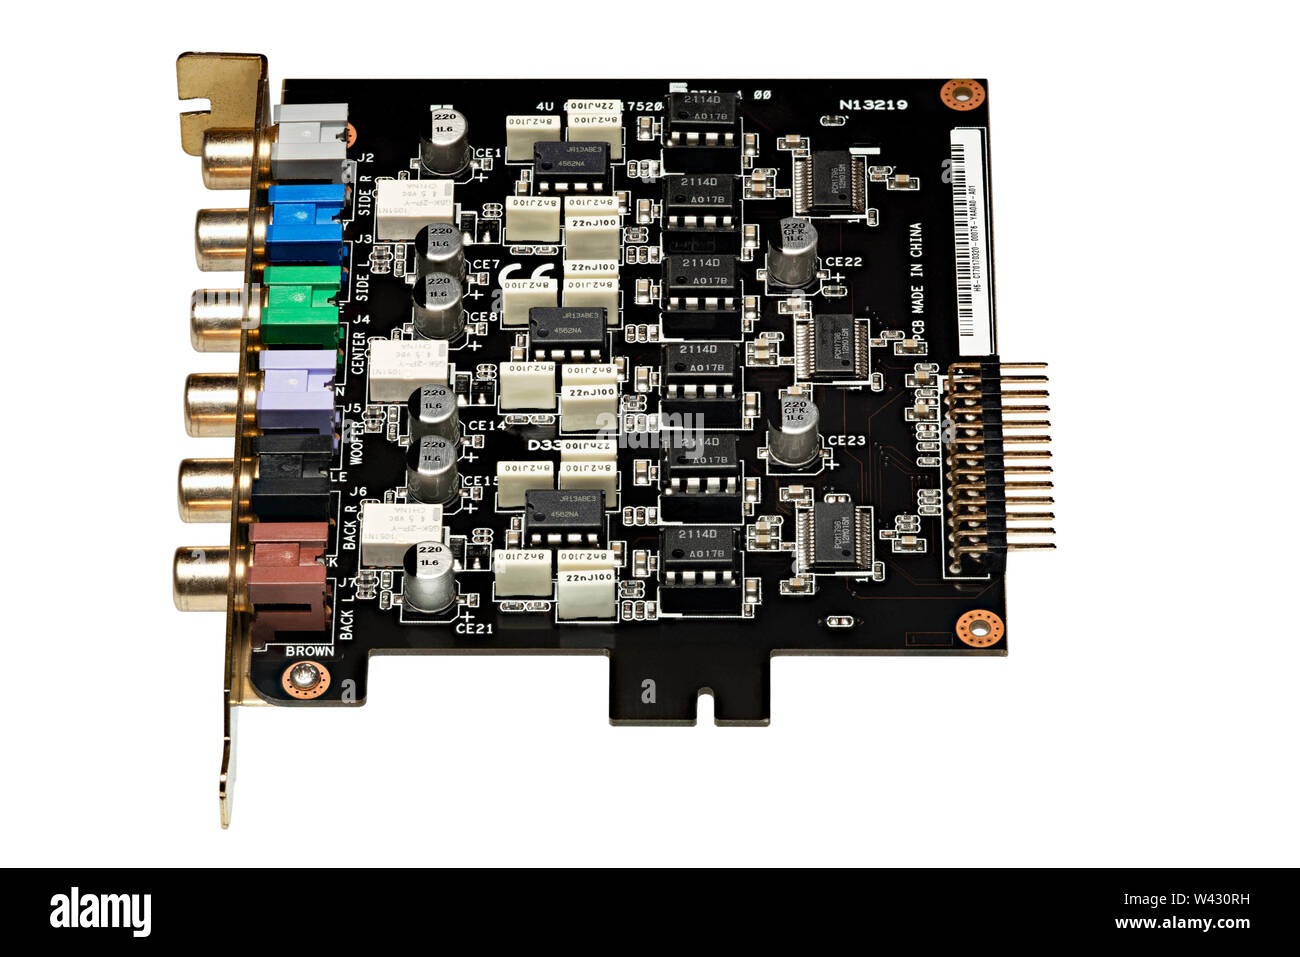 5.1 Surround Sound Analog Electronics Audio Expansion Card for Computer, Isolated on a White Background. Stock Photo